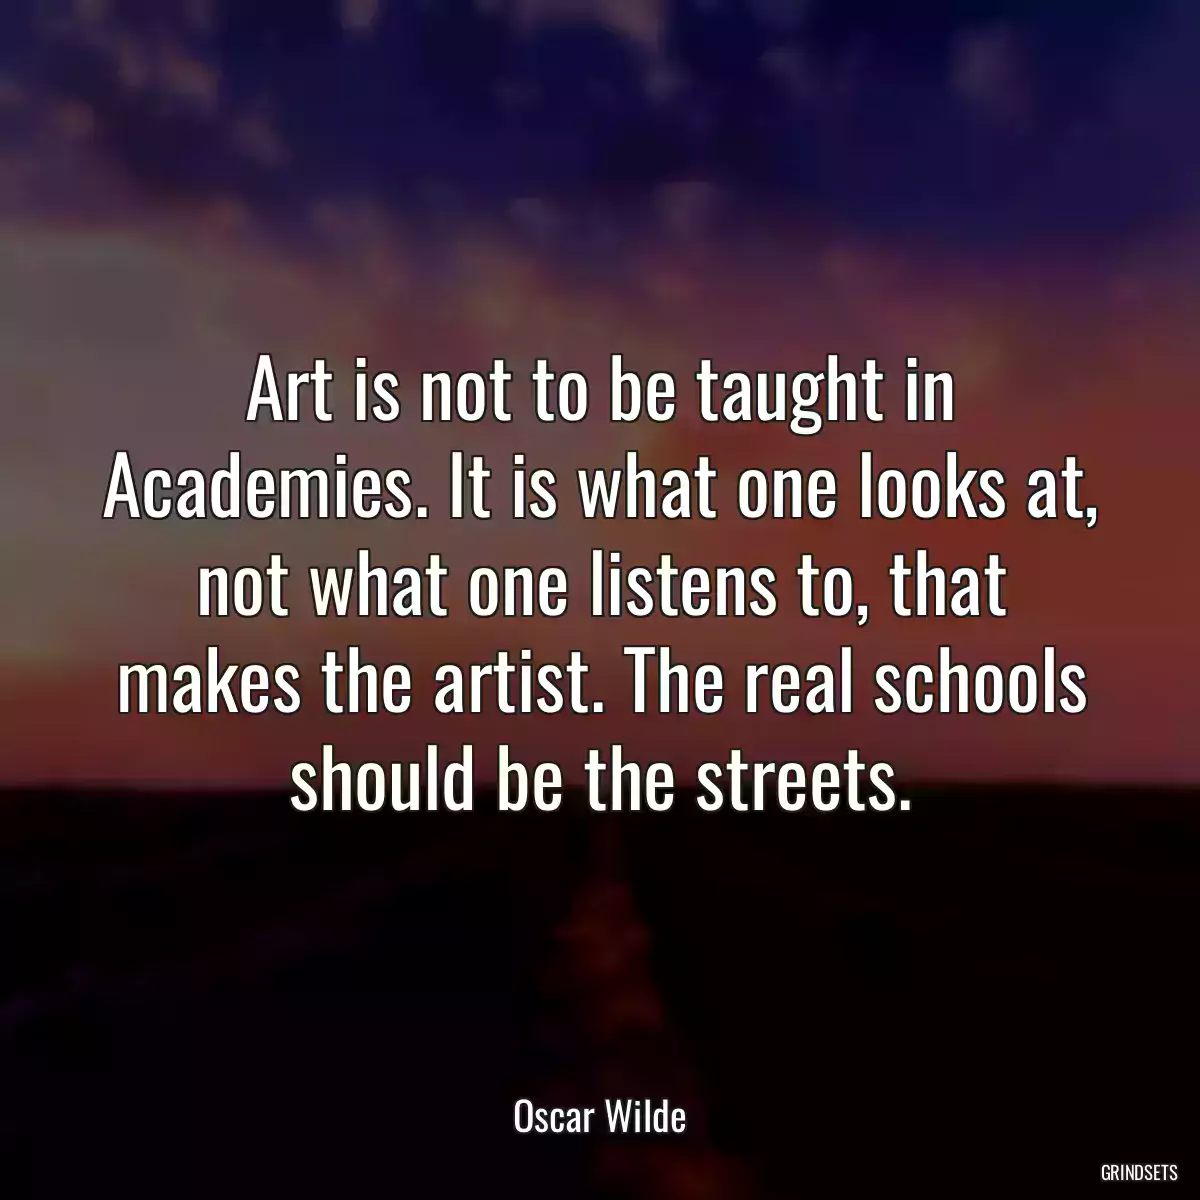 Art is not to be taught in Academies. It is what one looks at, not what one listens to, that makes the artist. The real schools should be the streets.